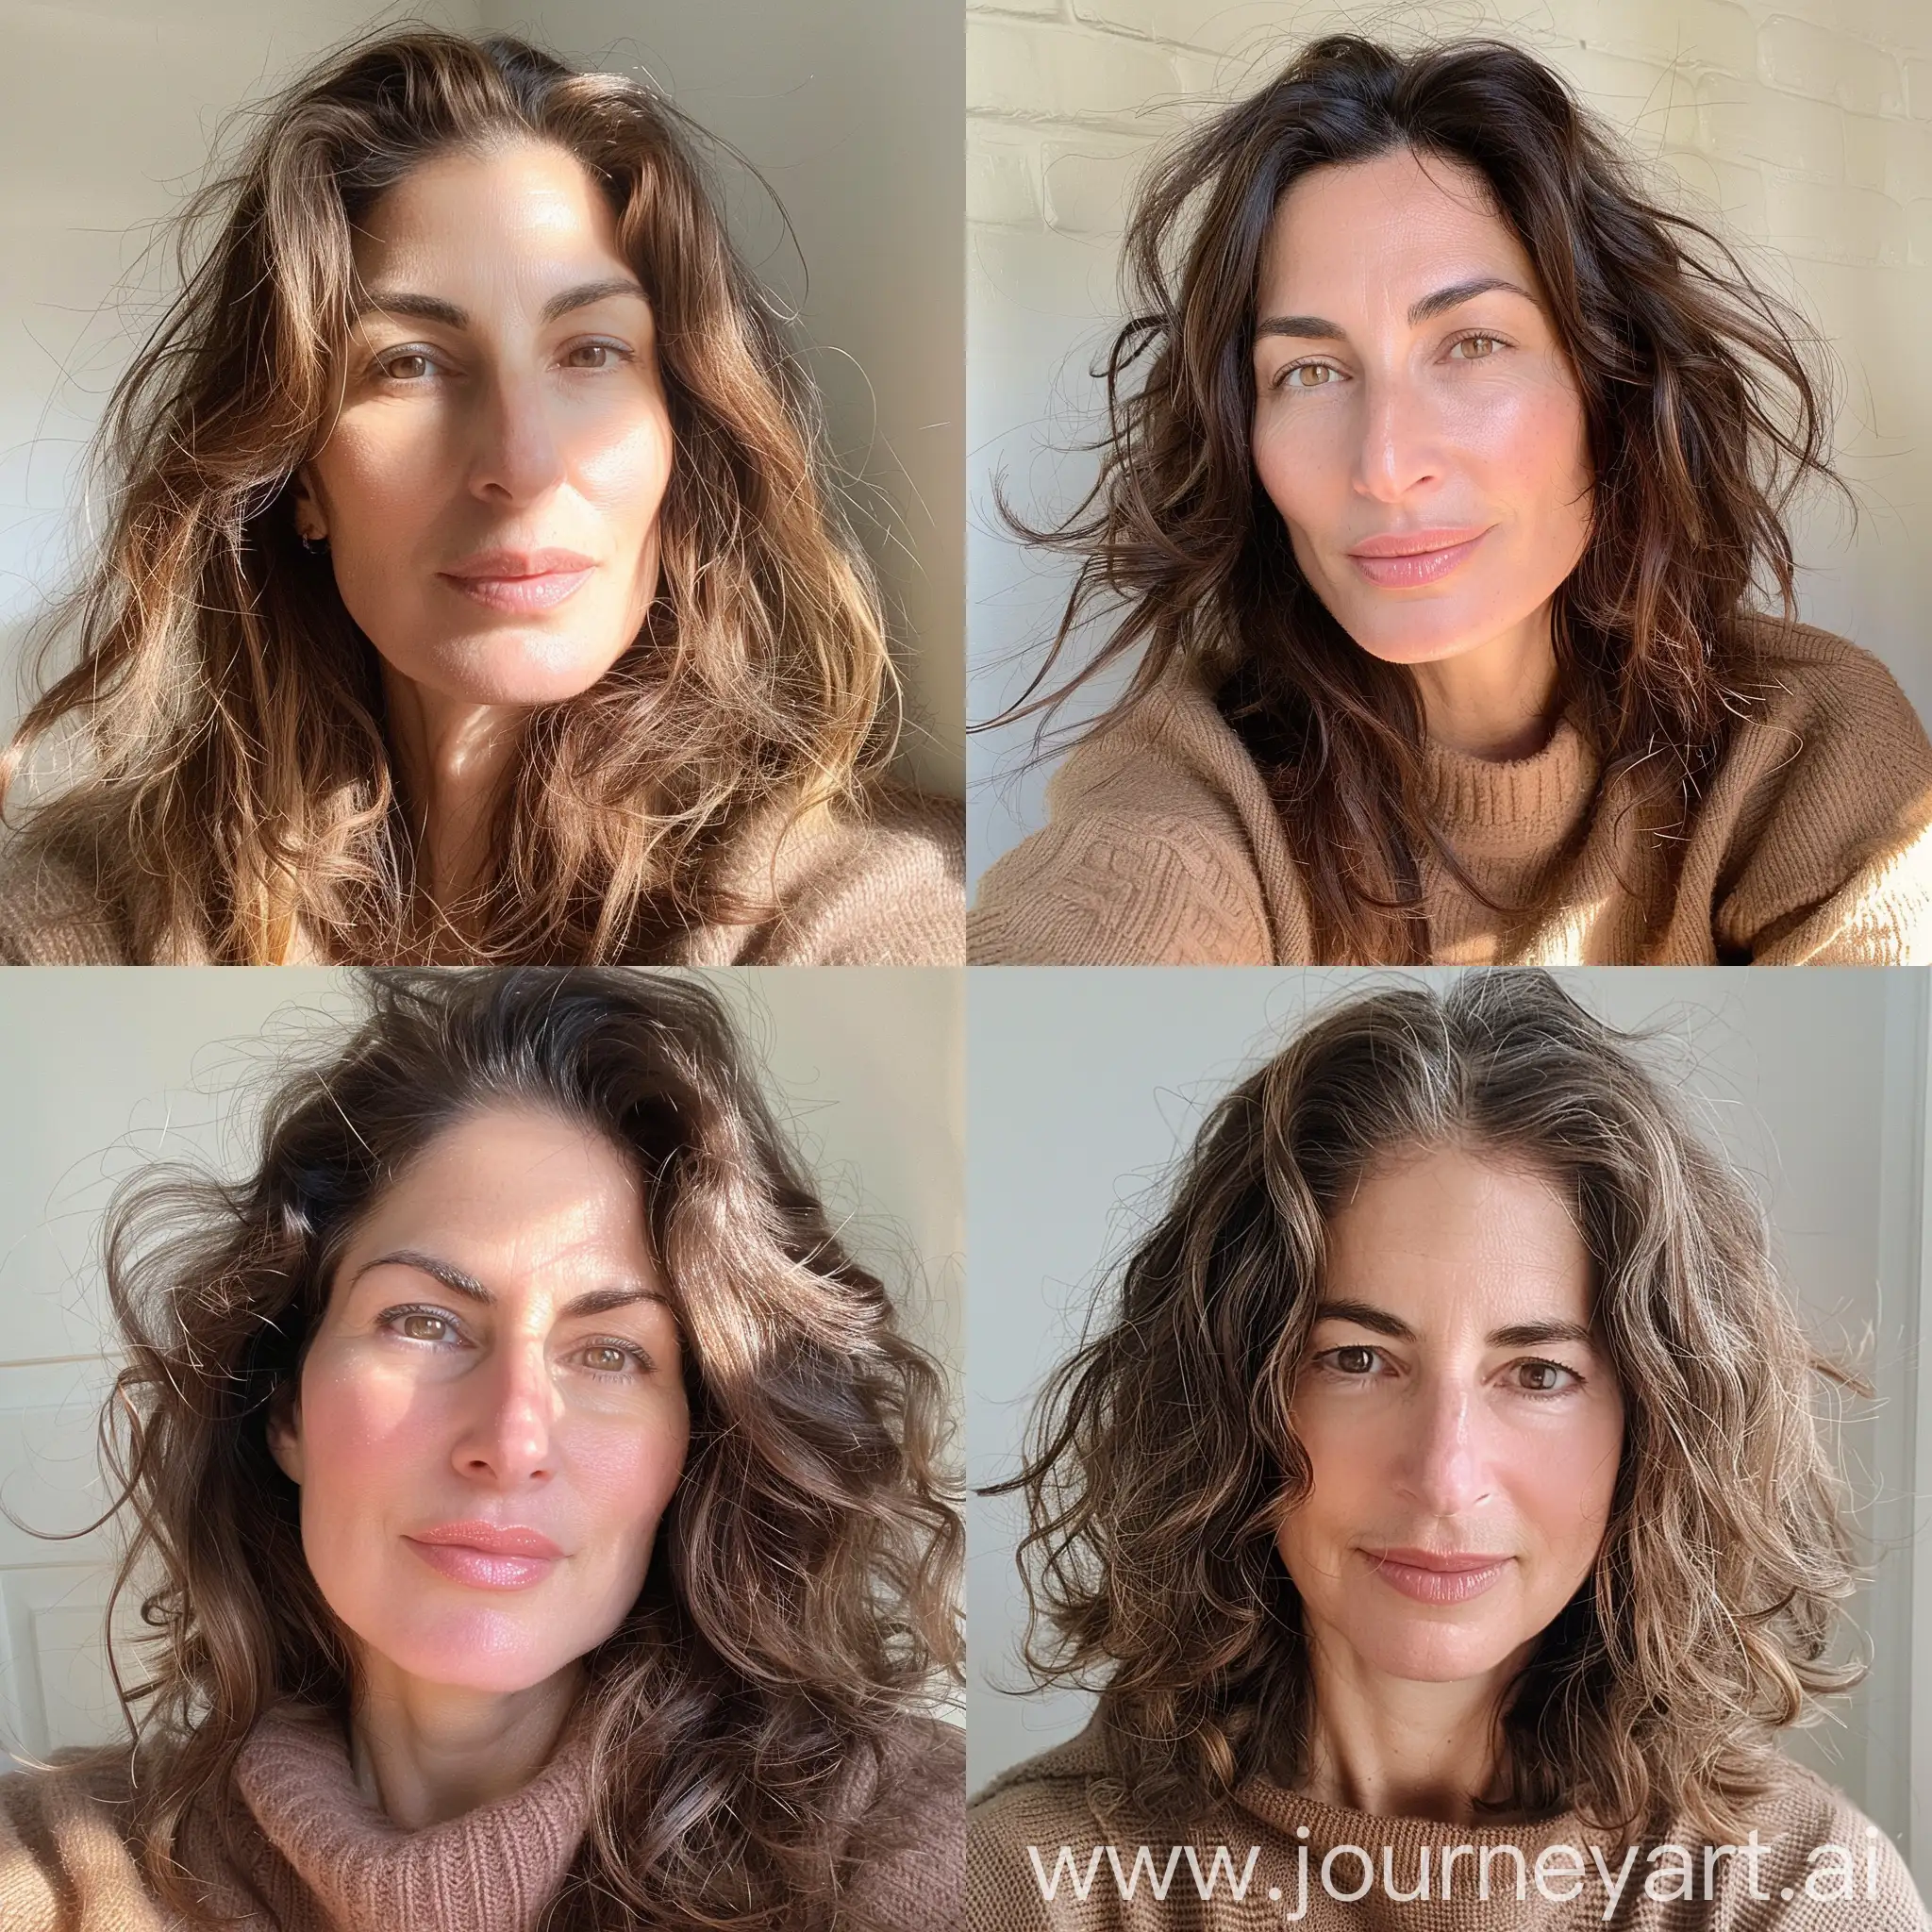 Jewish-Mothers-Aesthetic-Selfie-with-Wavy-Brown-Hair